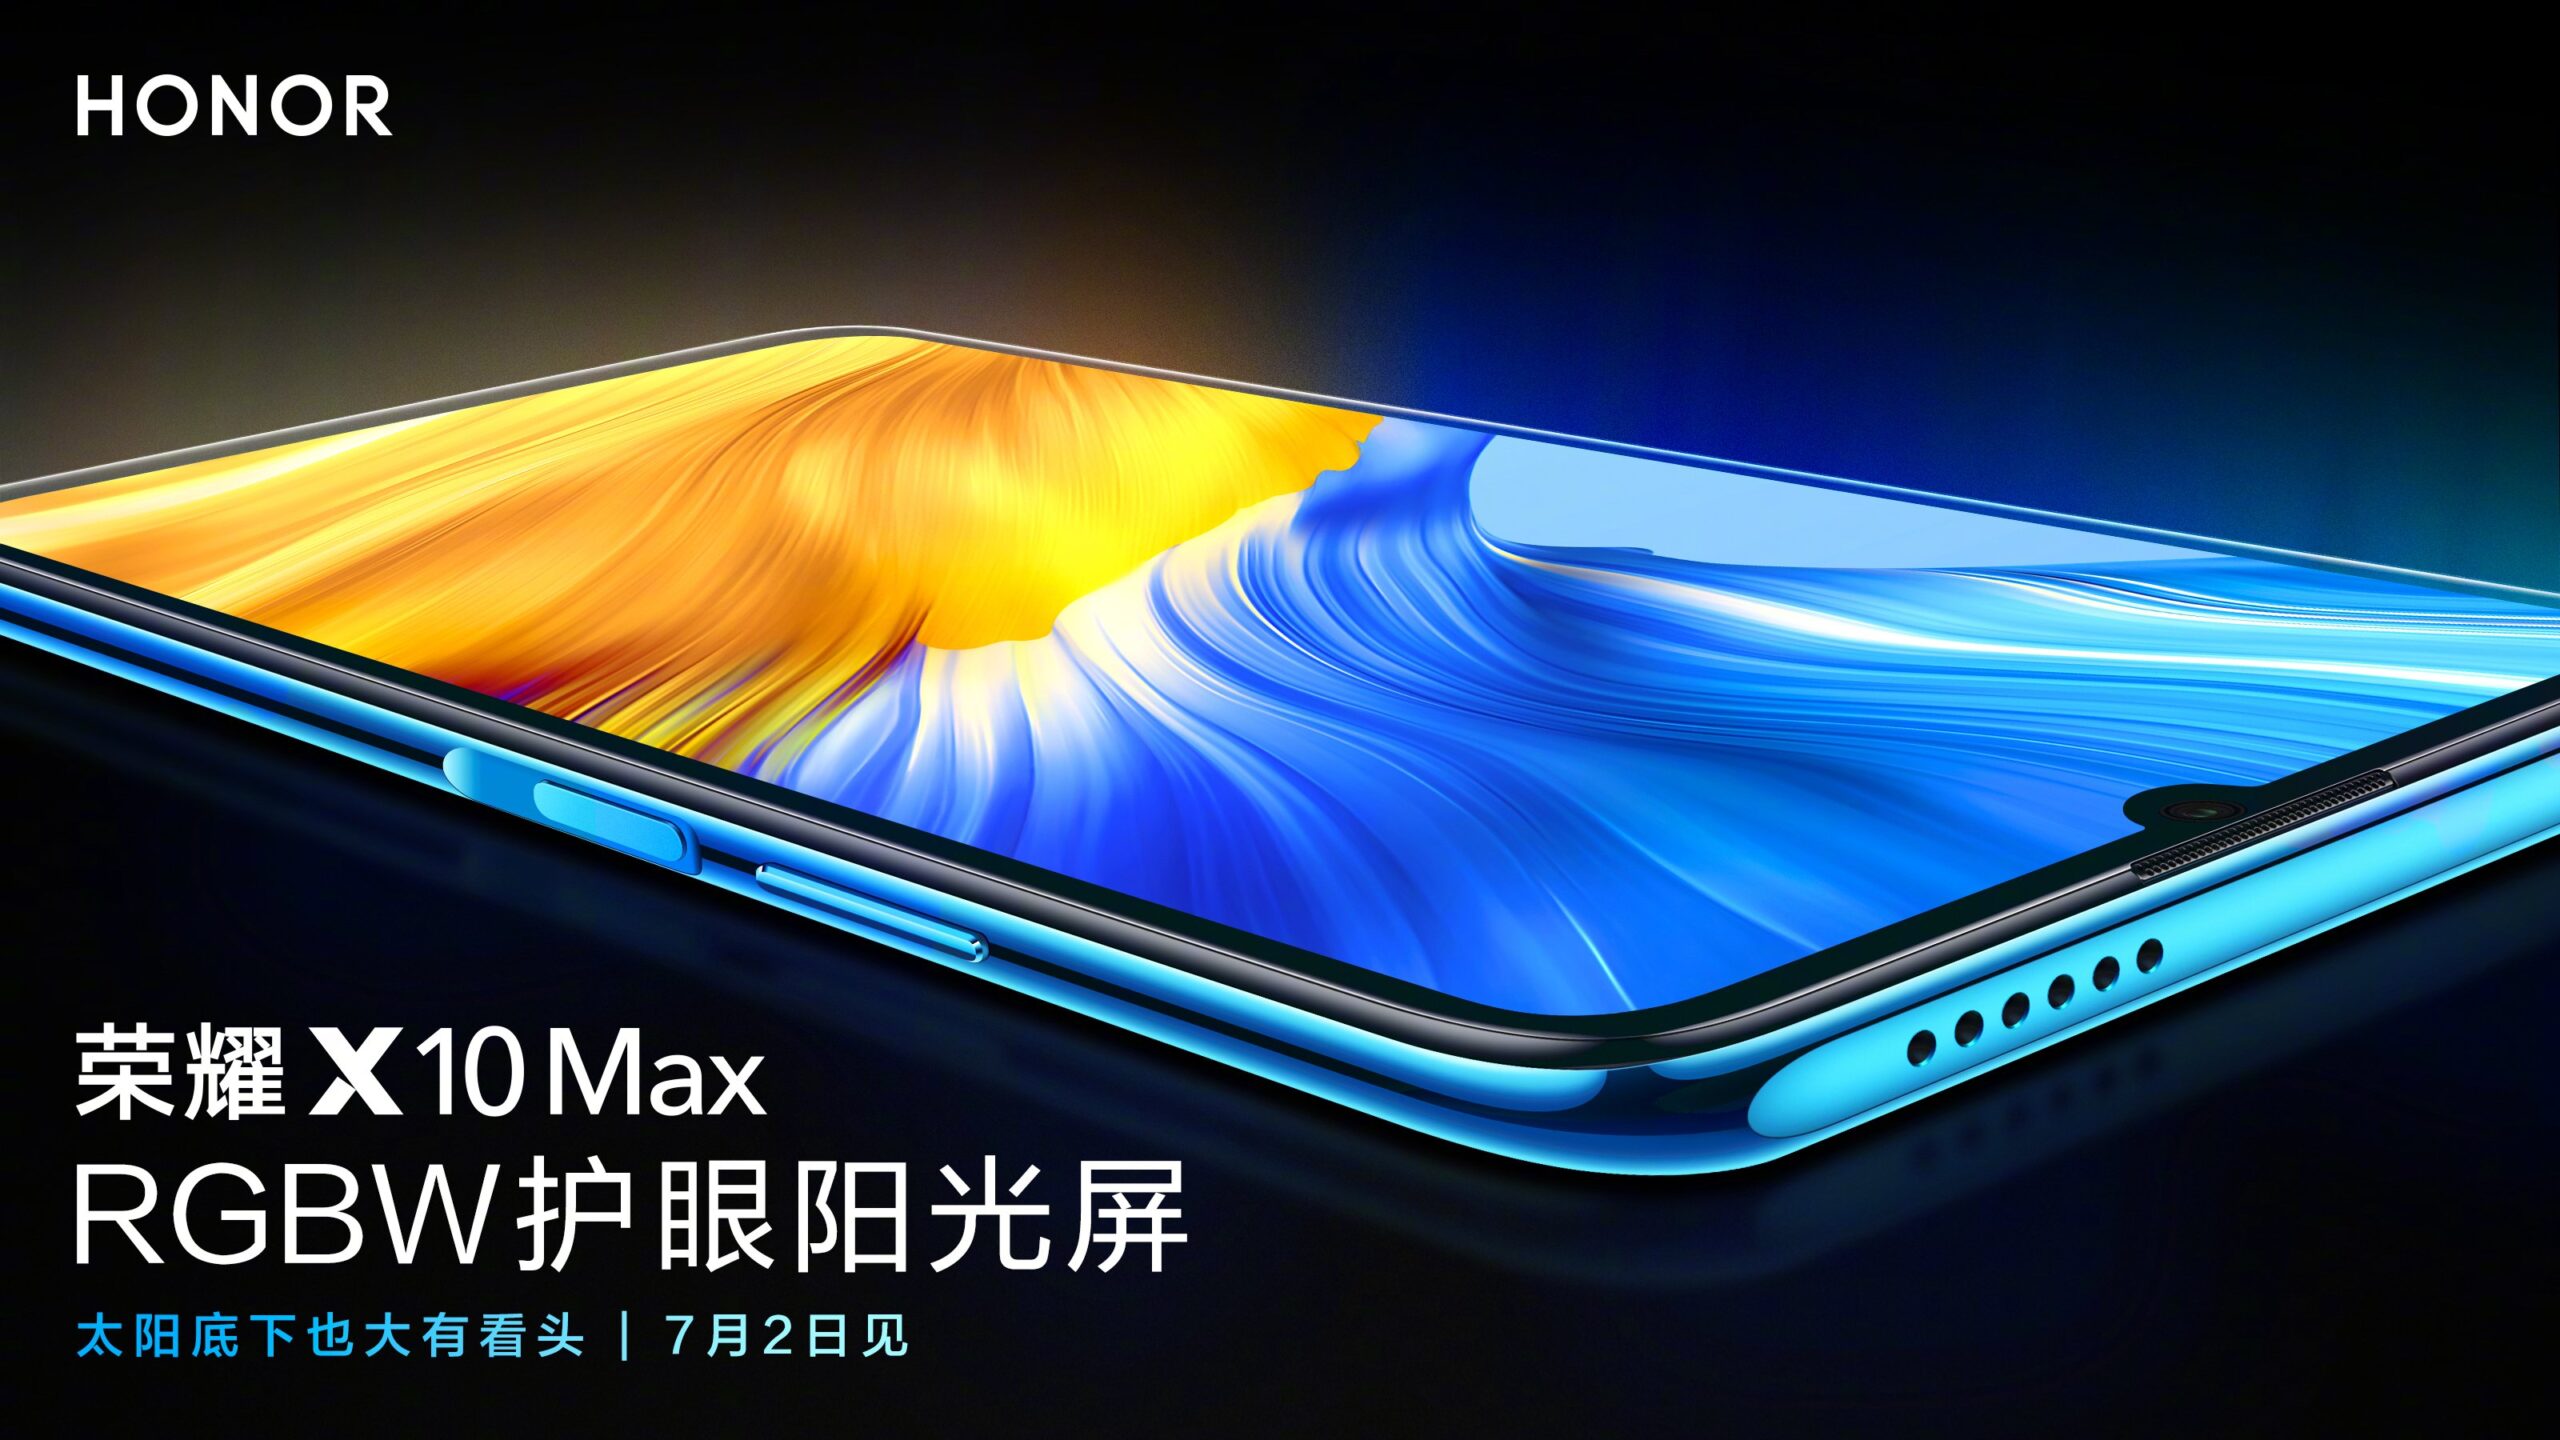 Honor X10 Max will feature RGBW LCD panel for better brightness